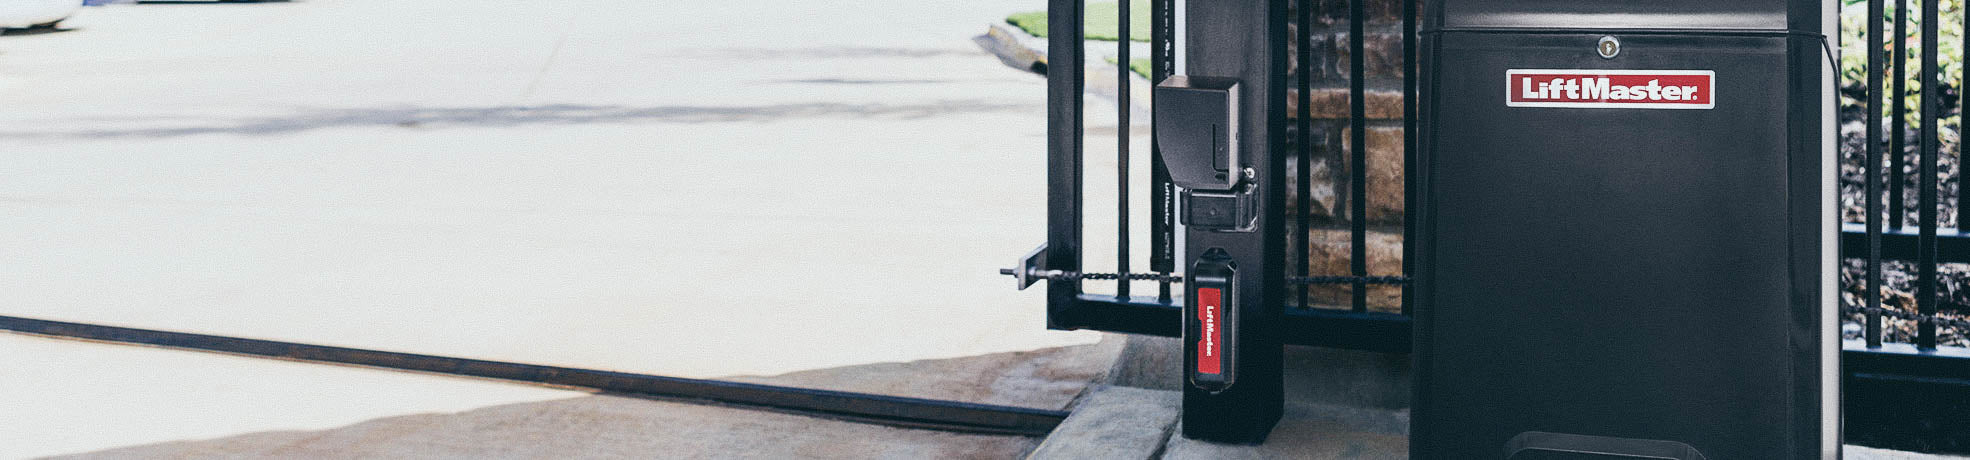 Gate Opener and Operator Accessories | All Security Equipment